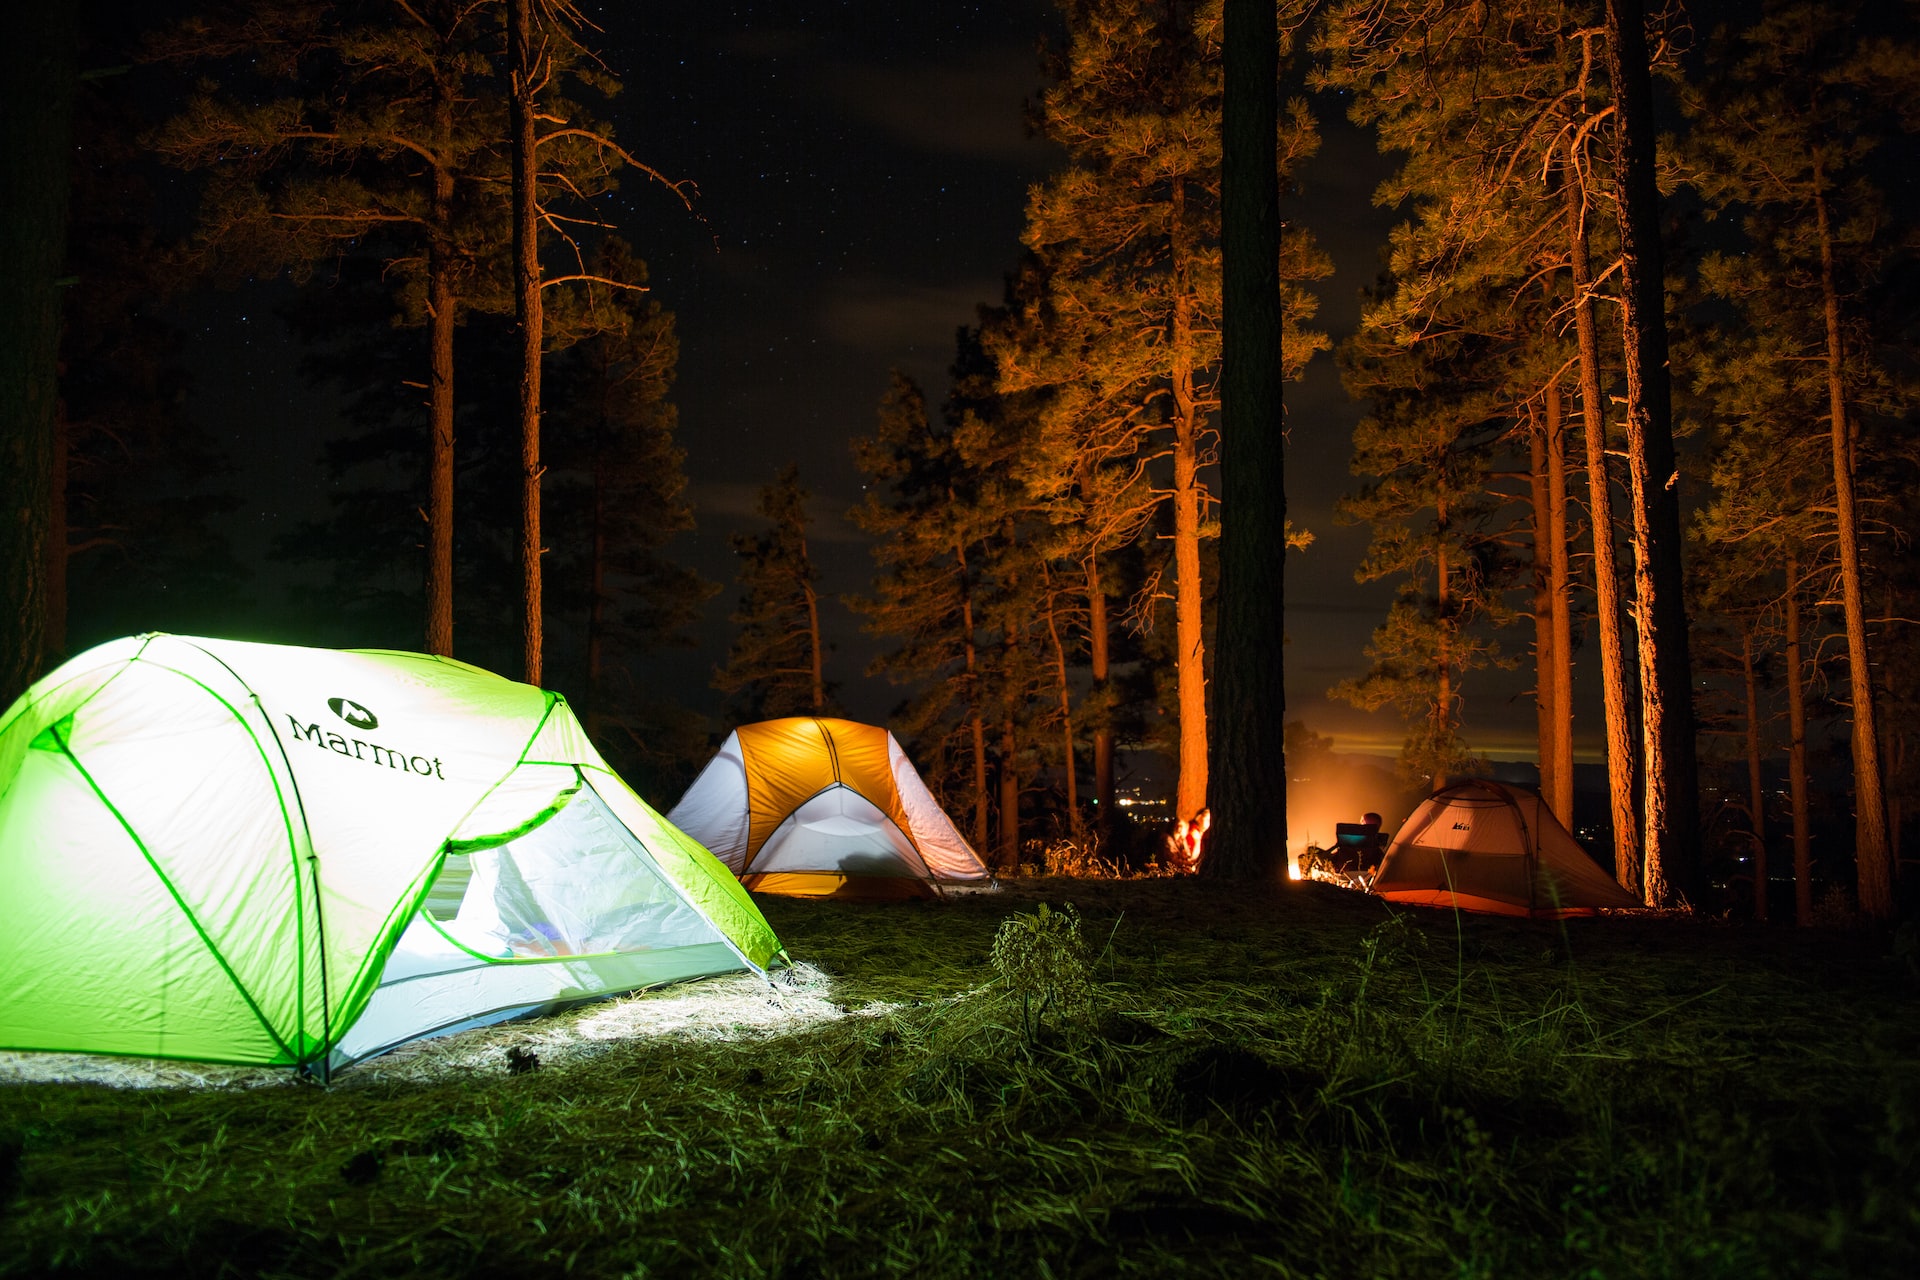 A Beginner’s Guide to Camping: What should you bring and prepare?